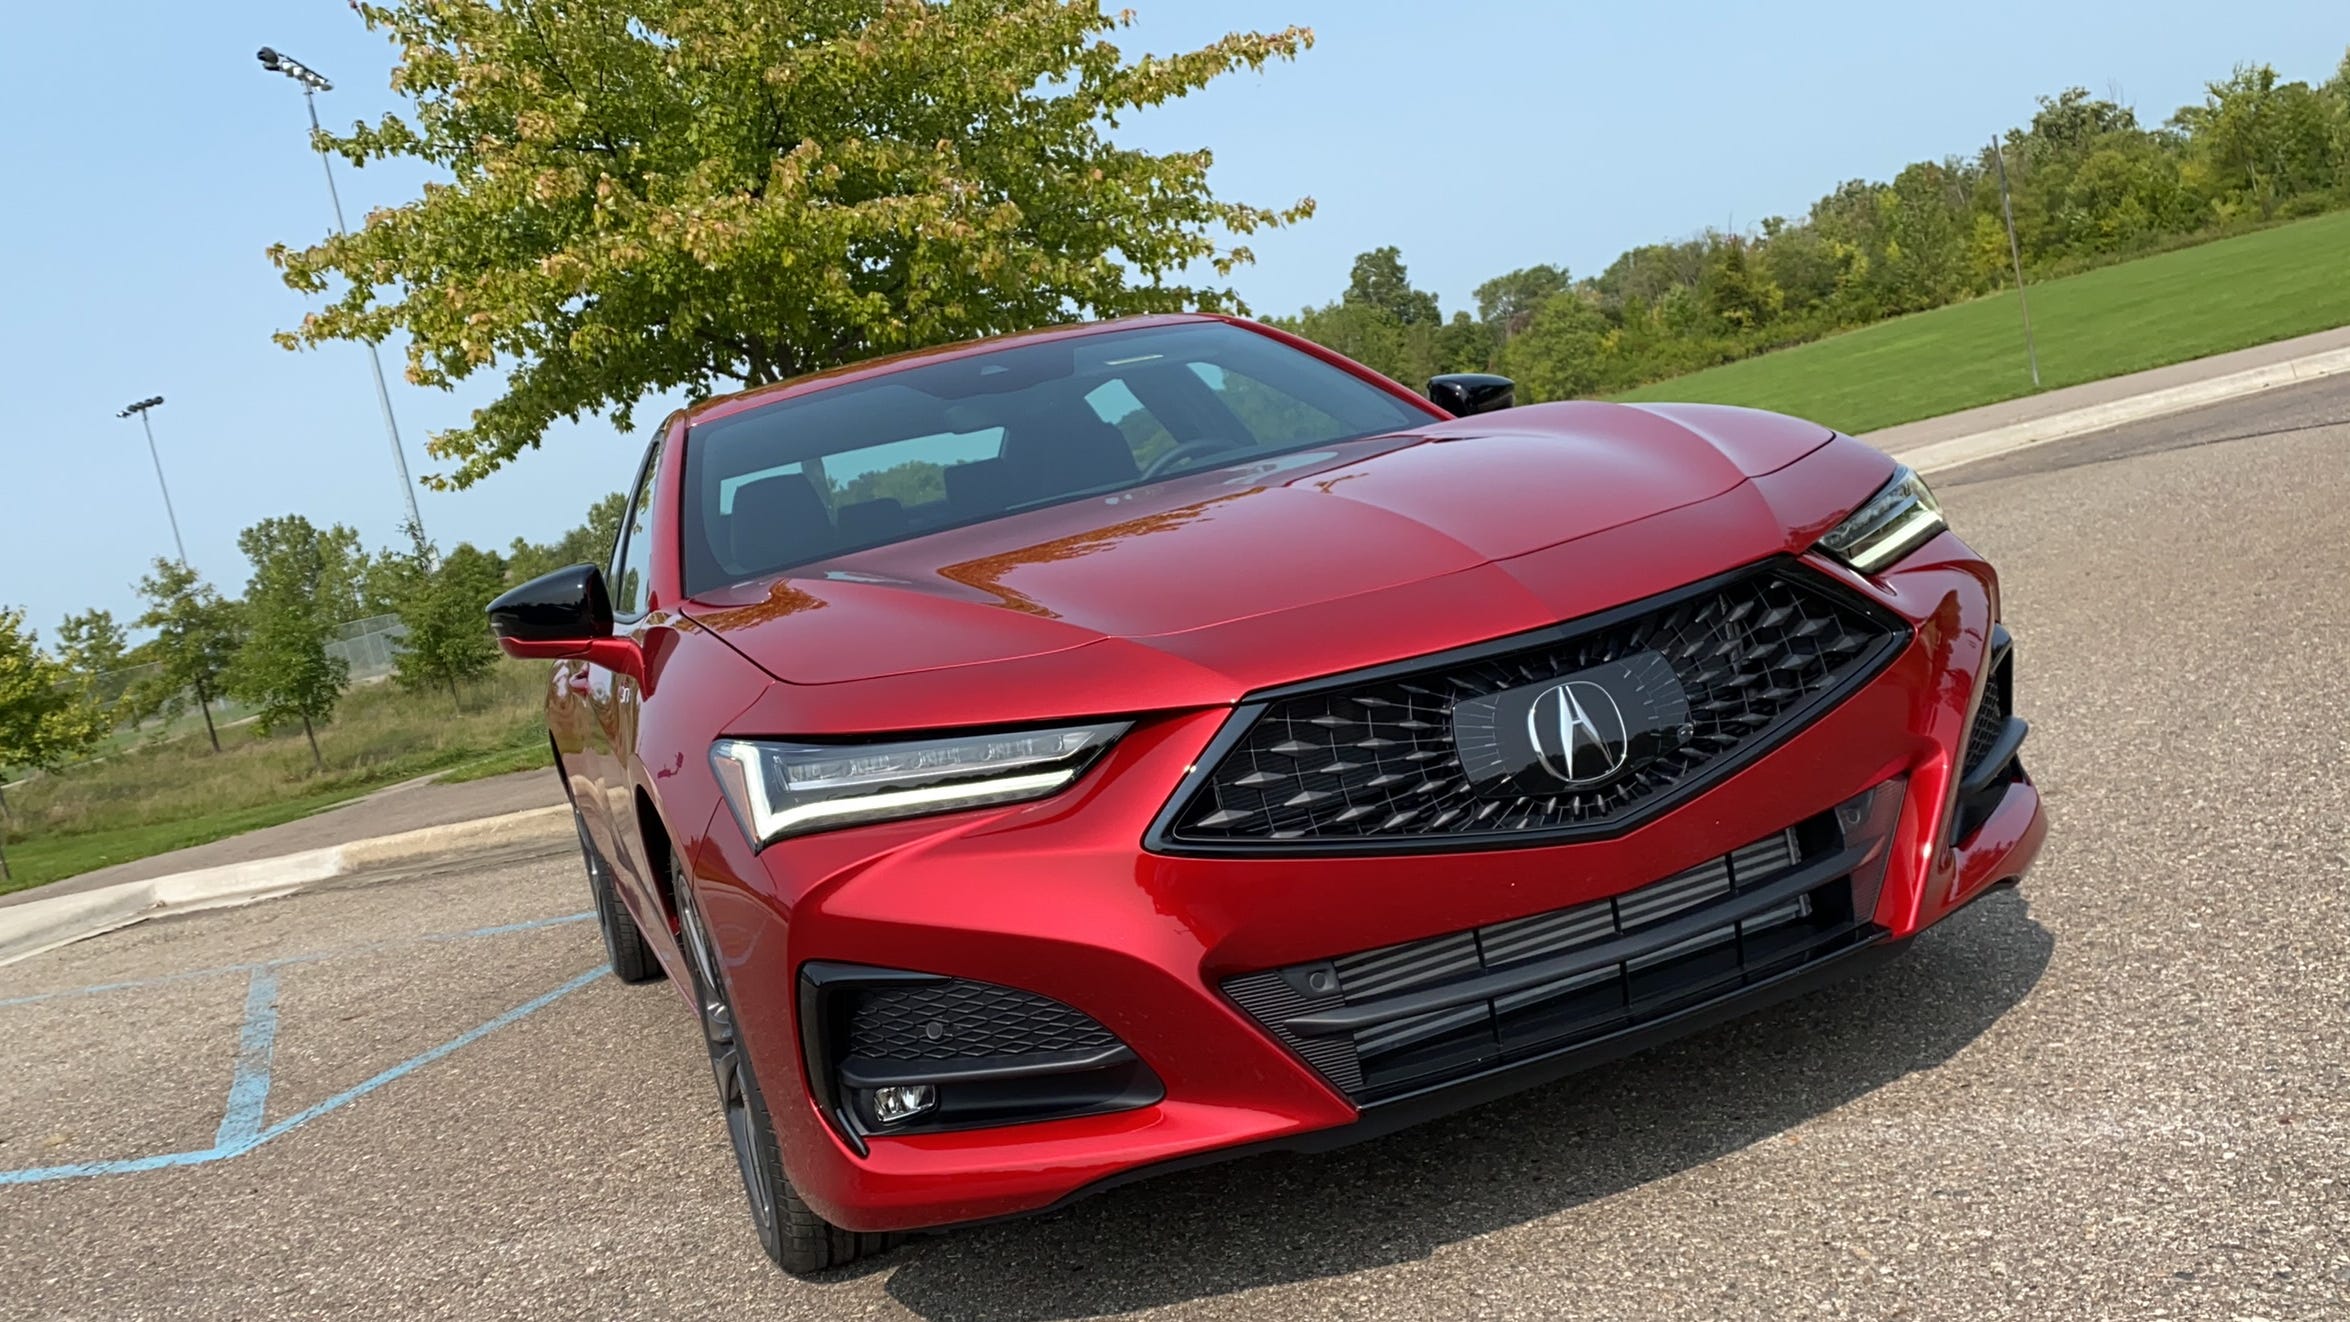 2021 Acura TLX's appeal: New platform, attractive price